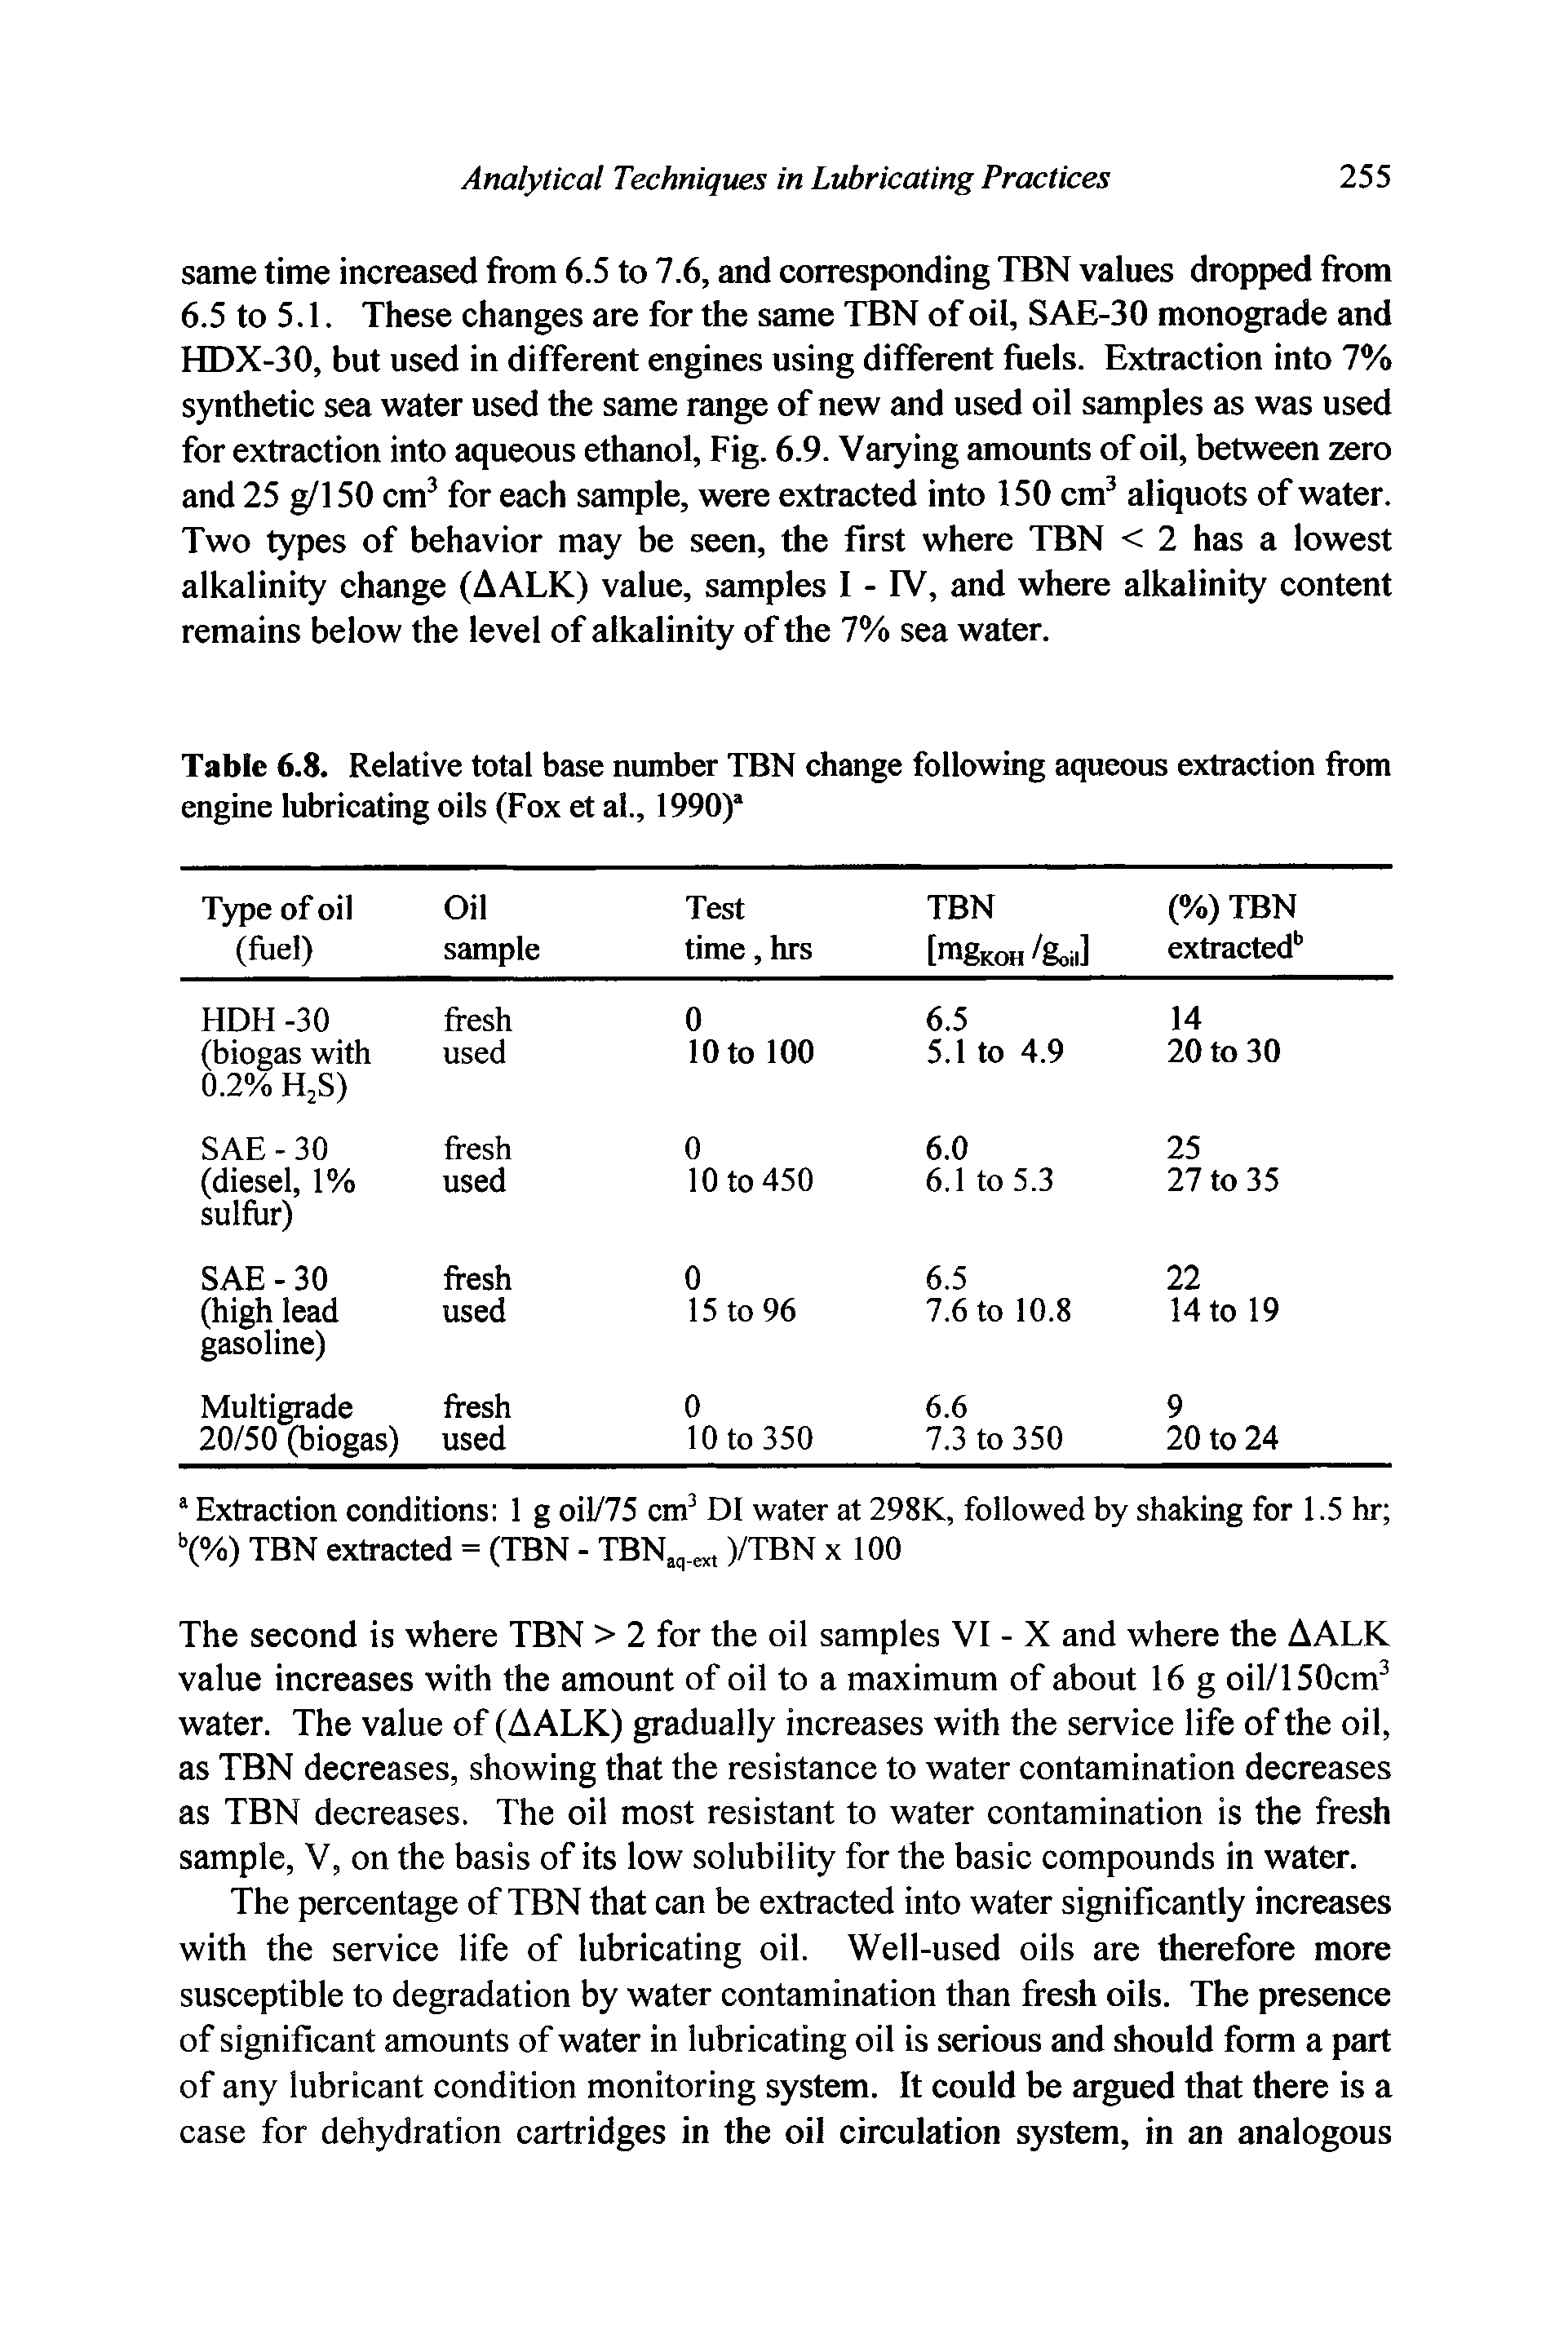 Table 6.8. Relative total base number TBN change following aqueous extraction from engine lubricating oils (Fox et al., 1990)a...